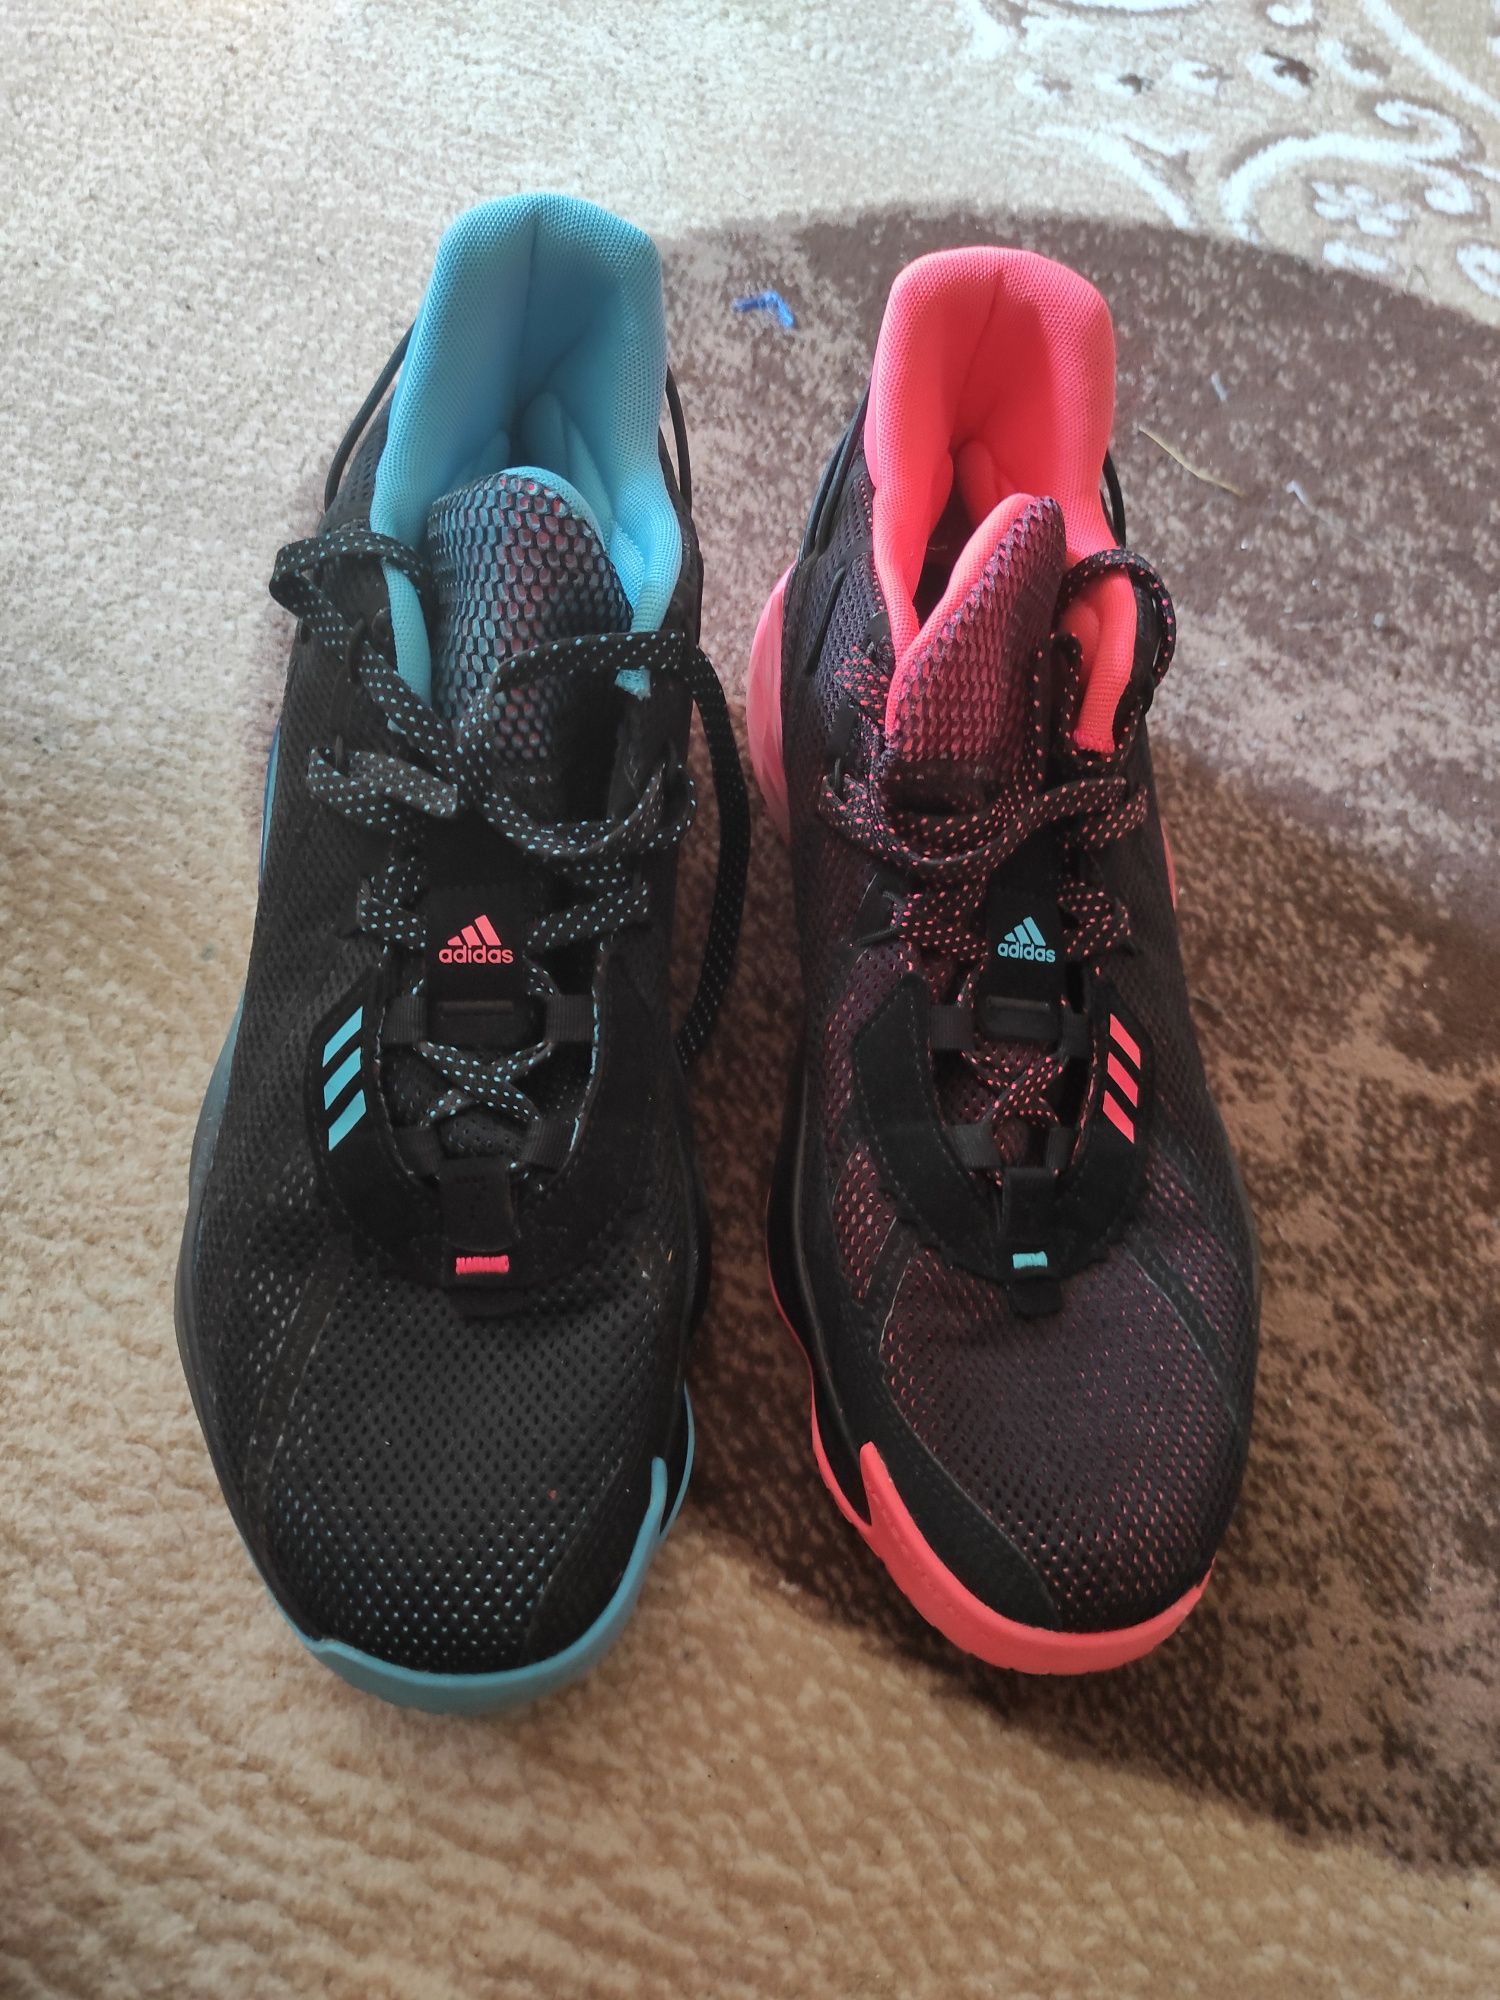 Adidas dame7 (blue and red) version